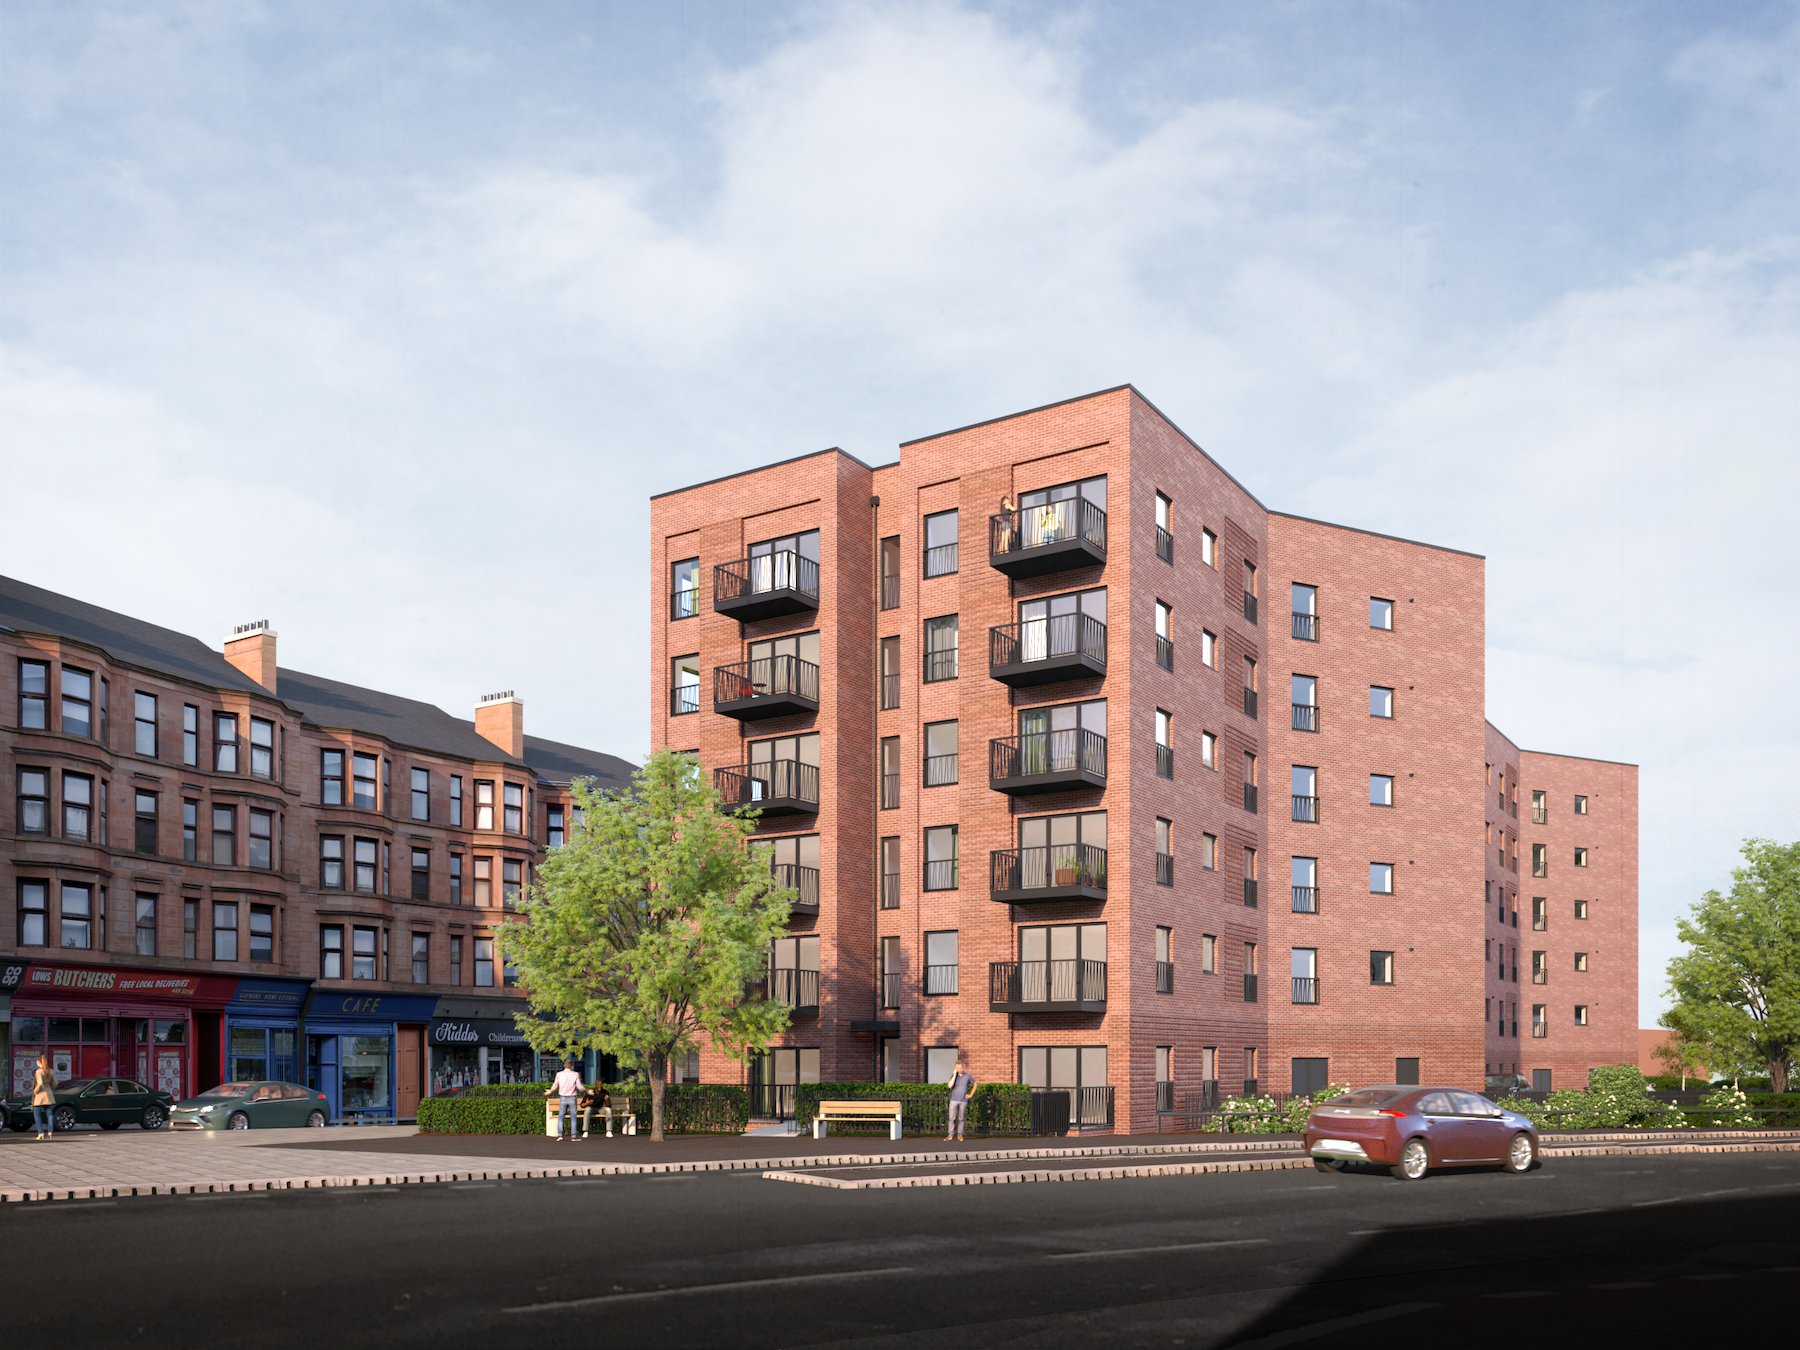 Govan's 46 amenity flat development marches towards spring completion